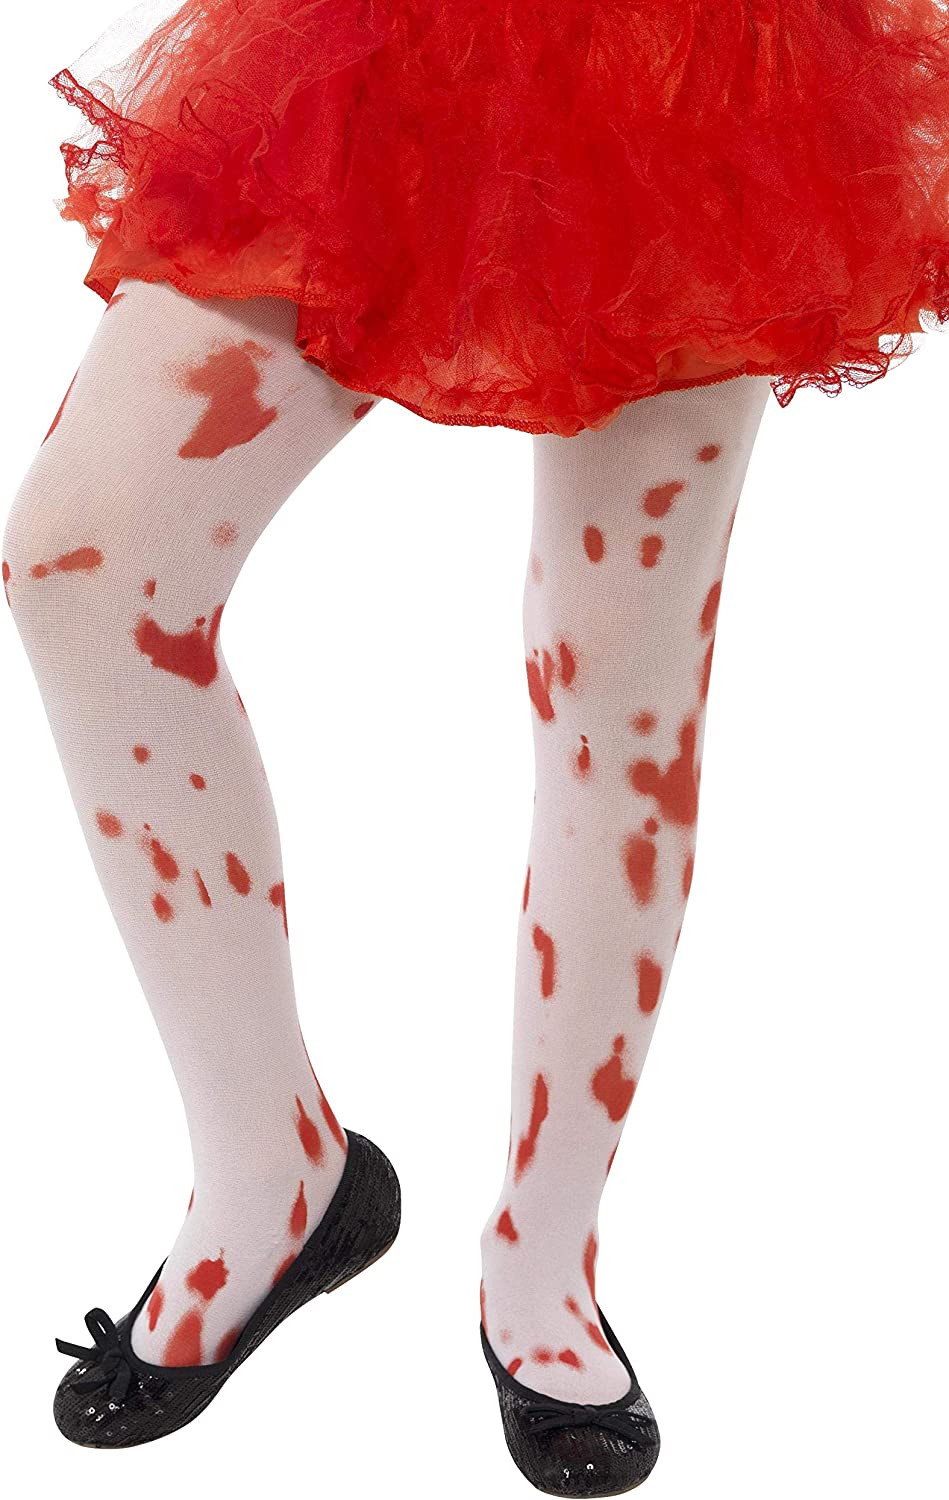 Smiffys Children's Tights with Blood Print (Medium - Large, White)